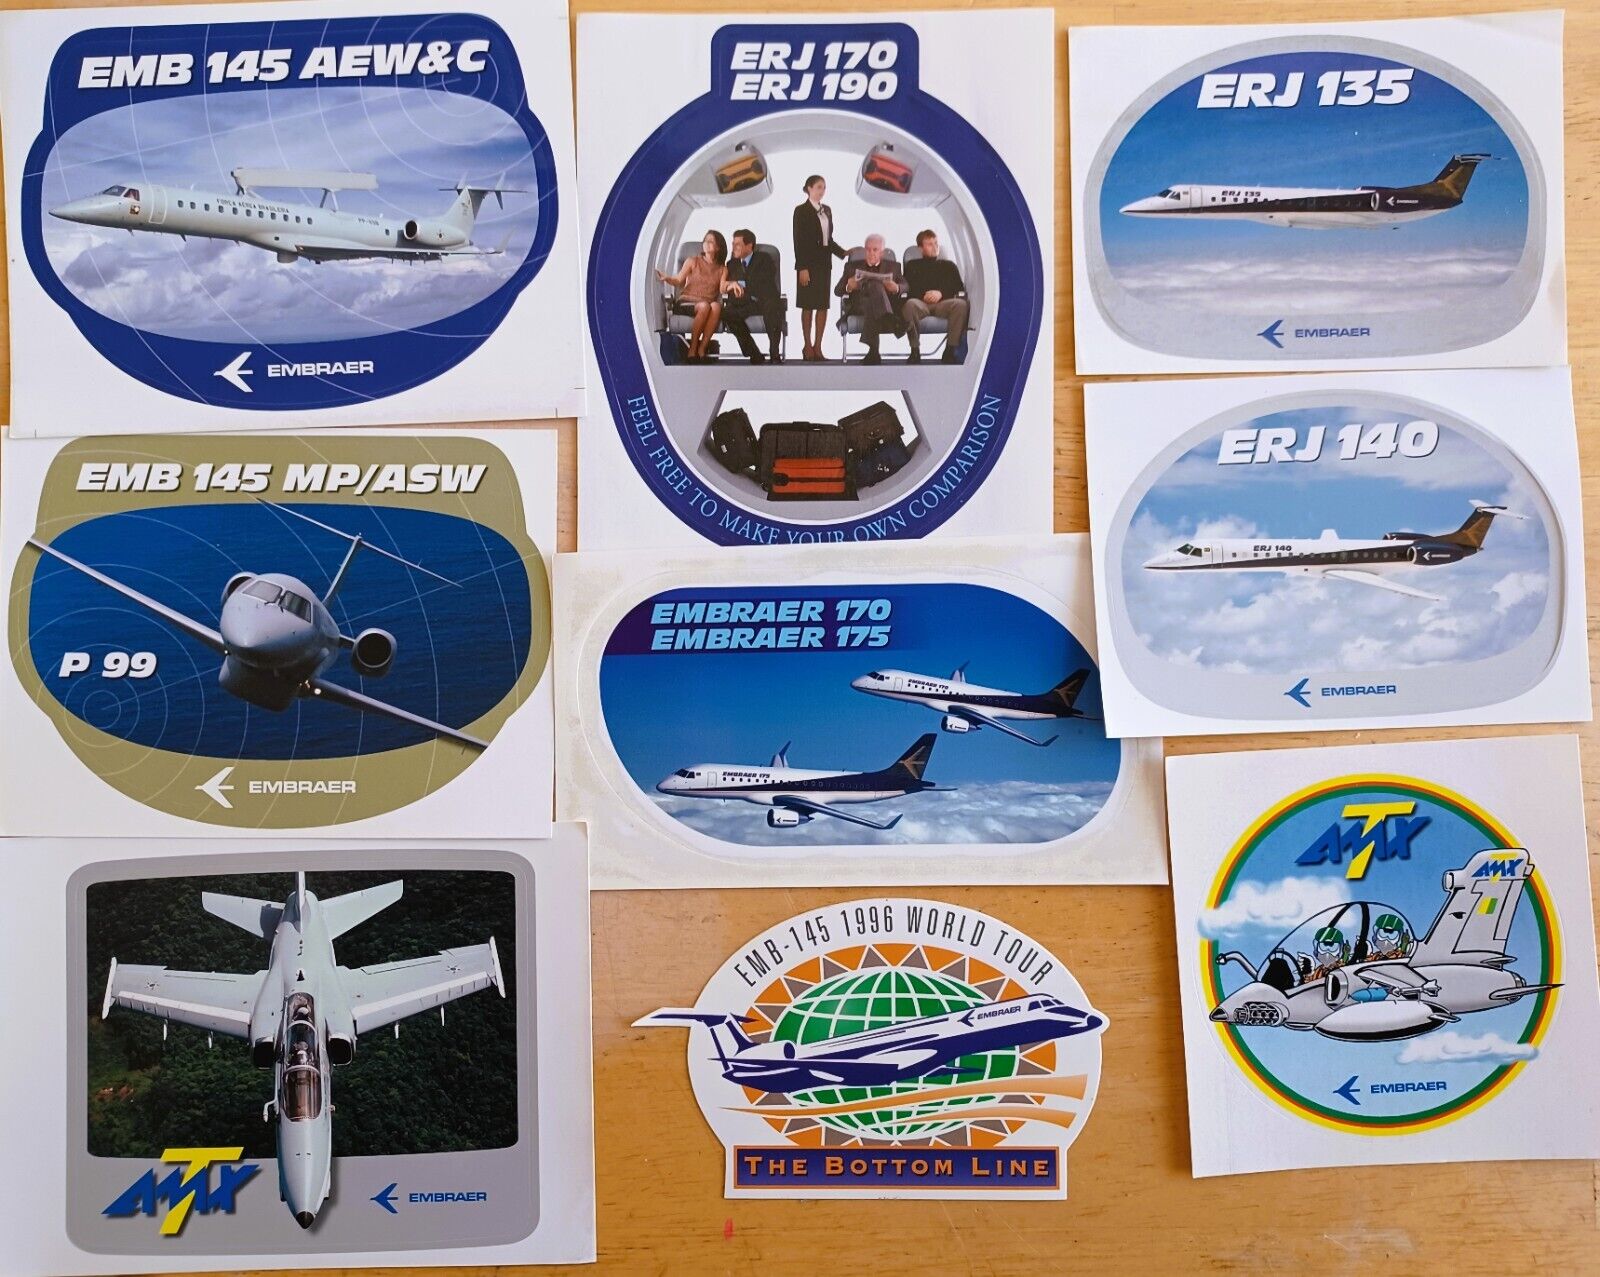 EMBRAER 9 Stickers, ERJ 135, 140, 145, 170, 190, & Military. Flying, Travel